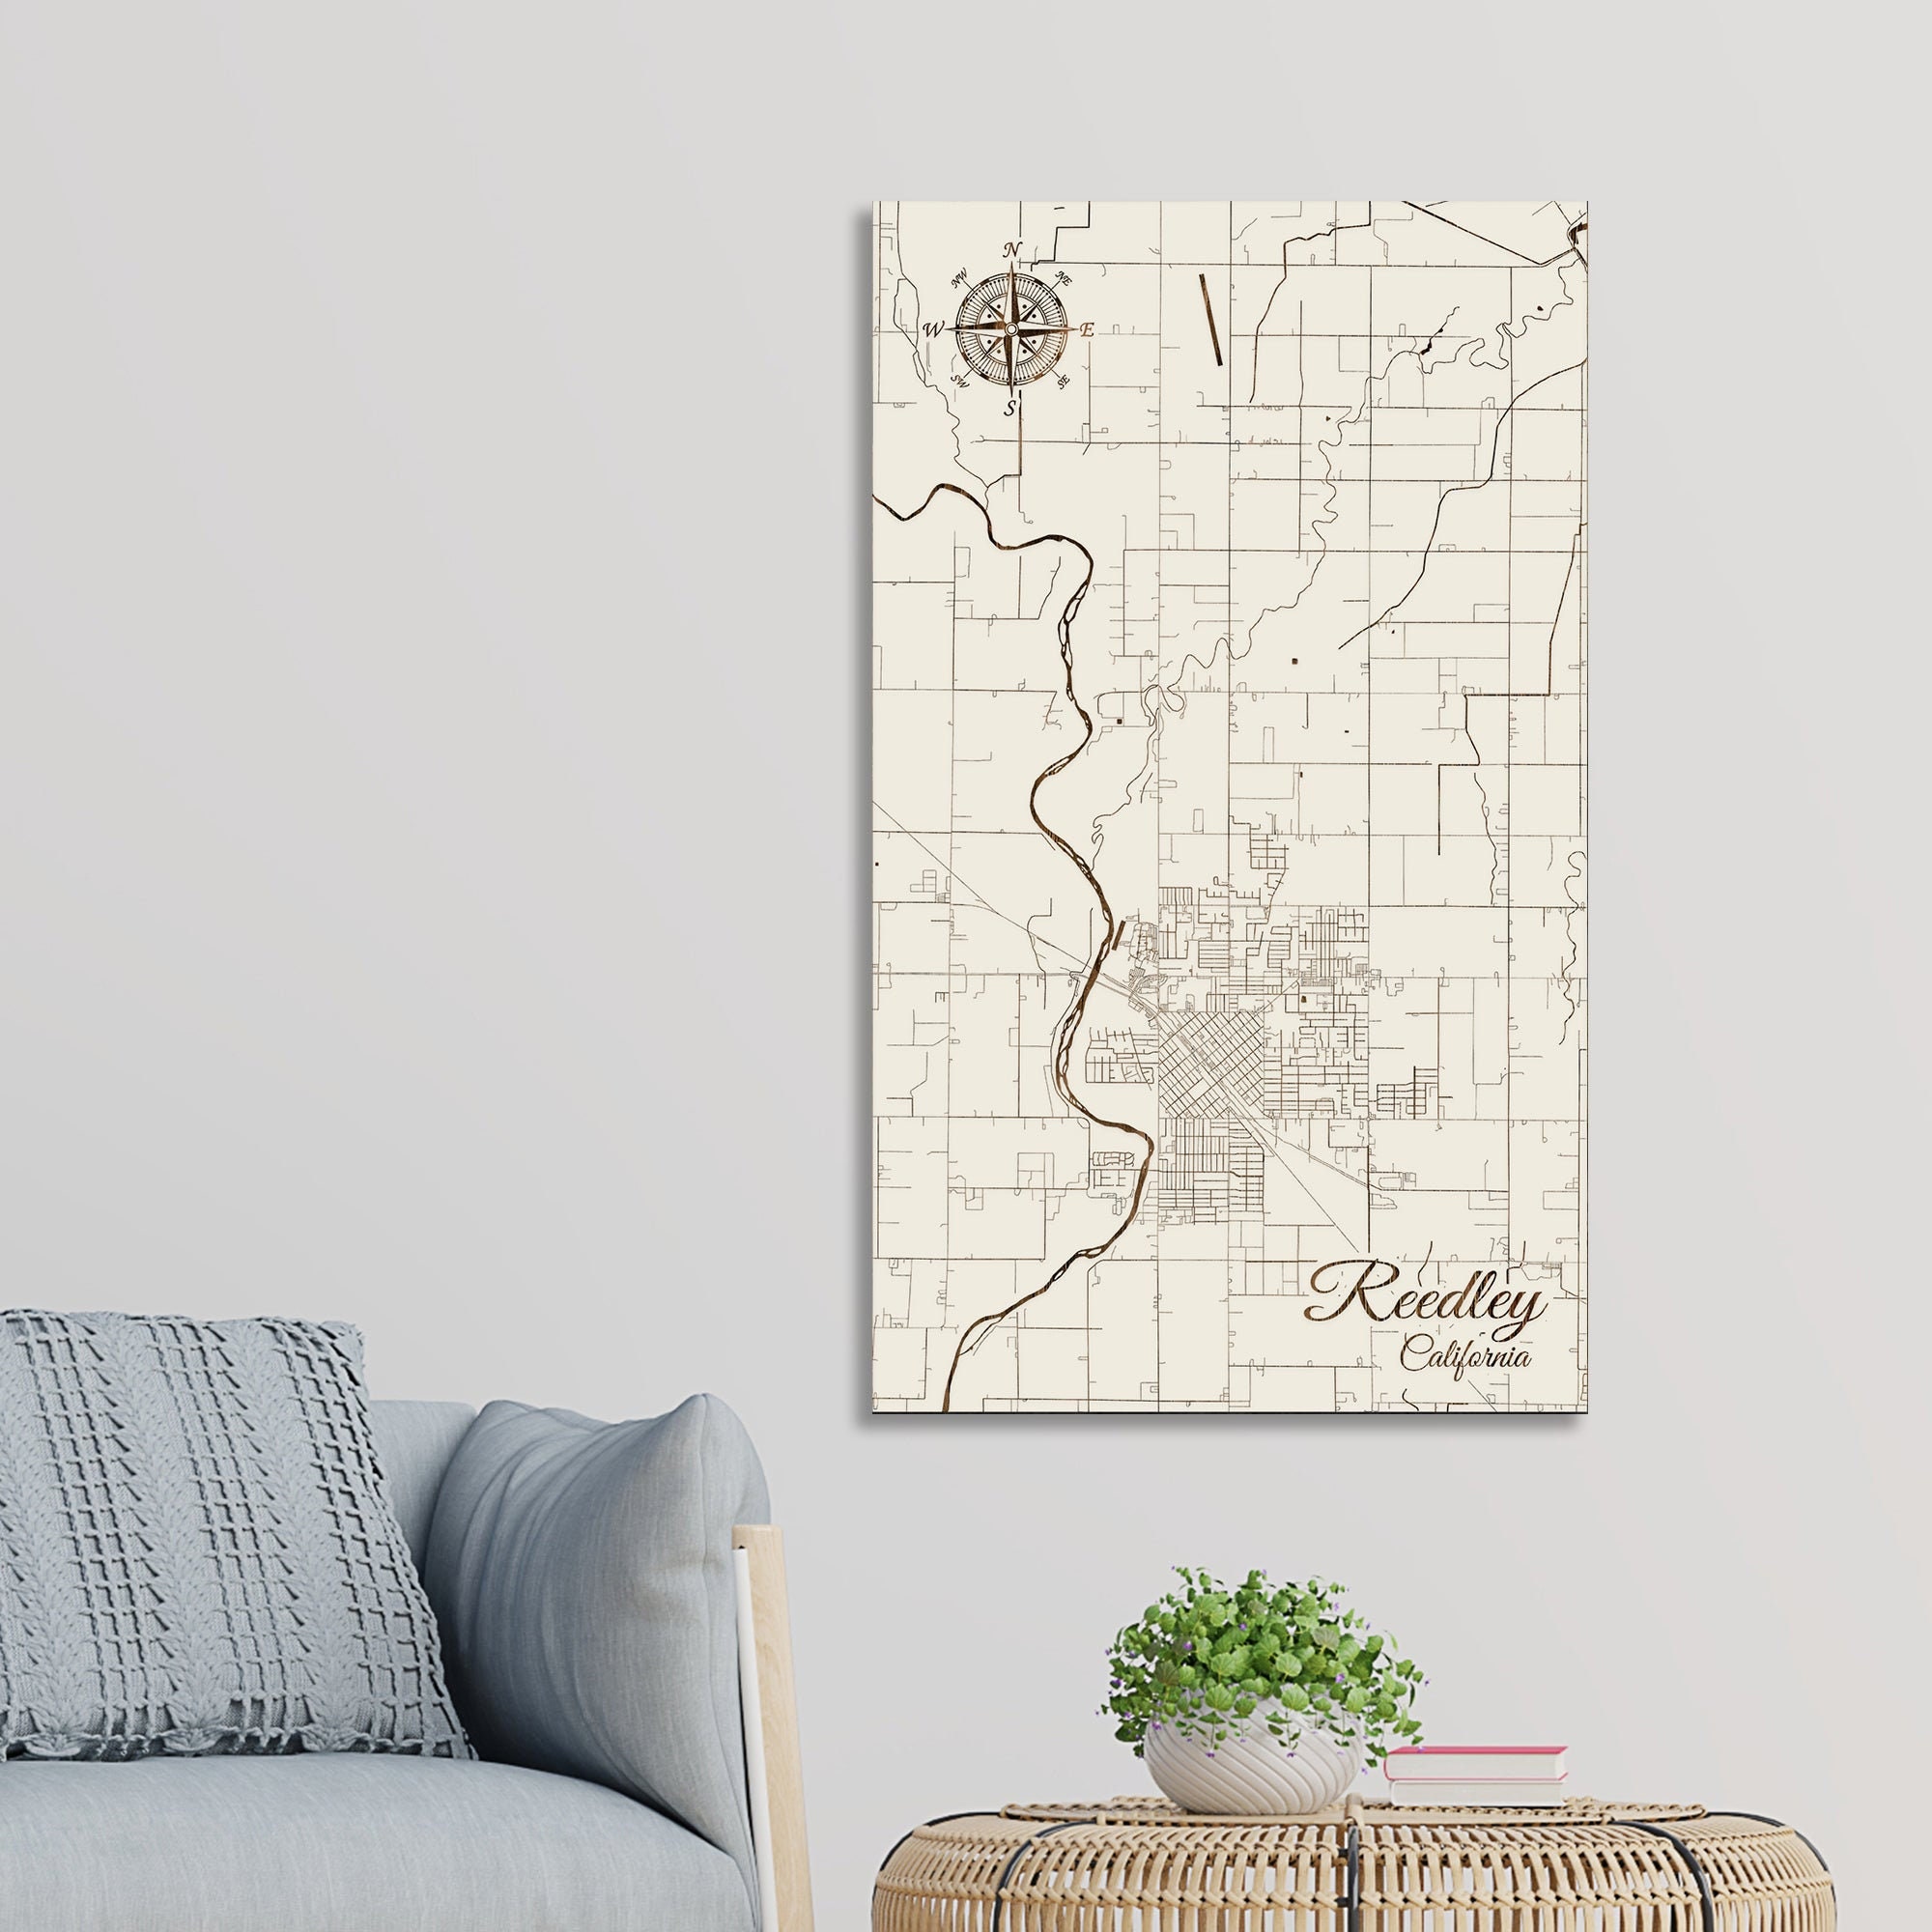 California Reedley Street Map Wood Engraved Maps Wall picture photo